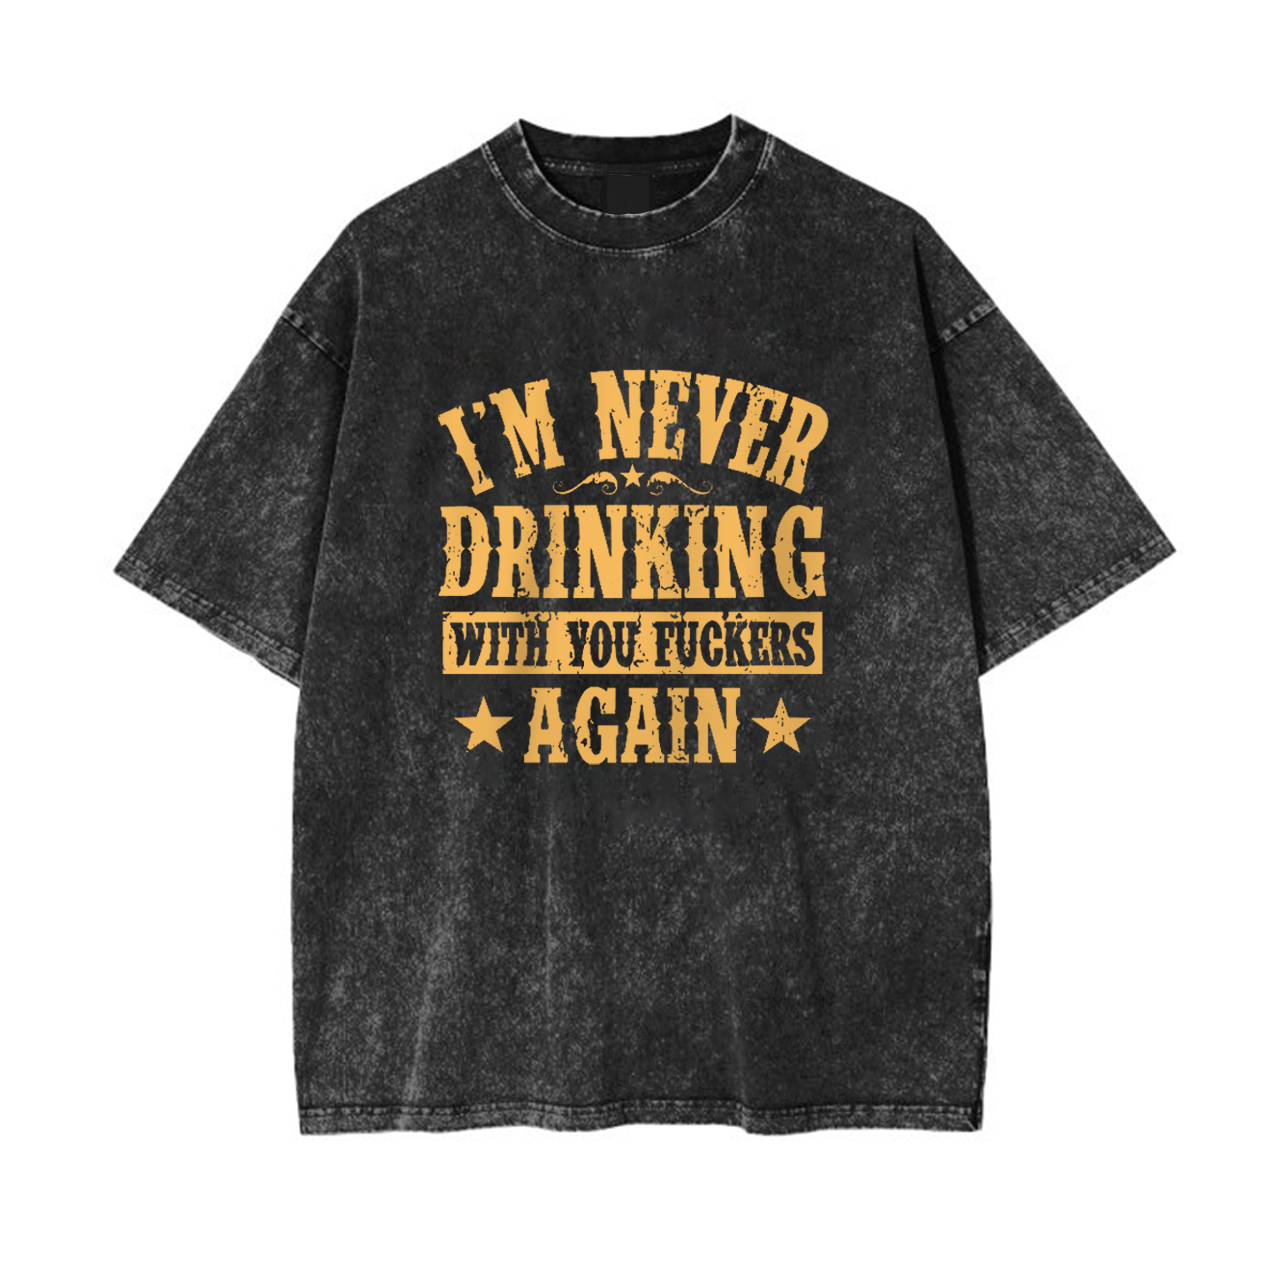 I'll Never Drink With You Bastards Again Garment-dye Tees